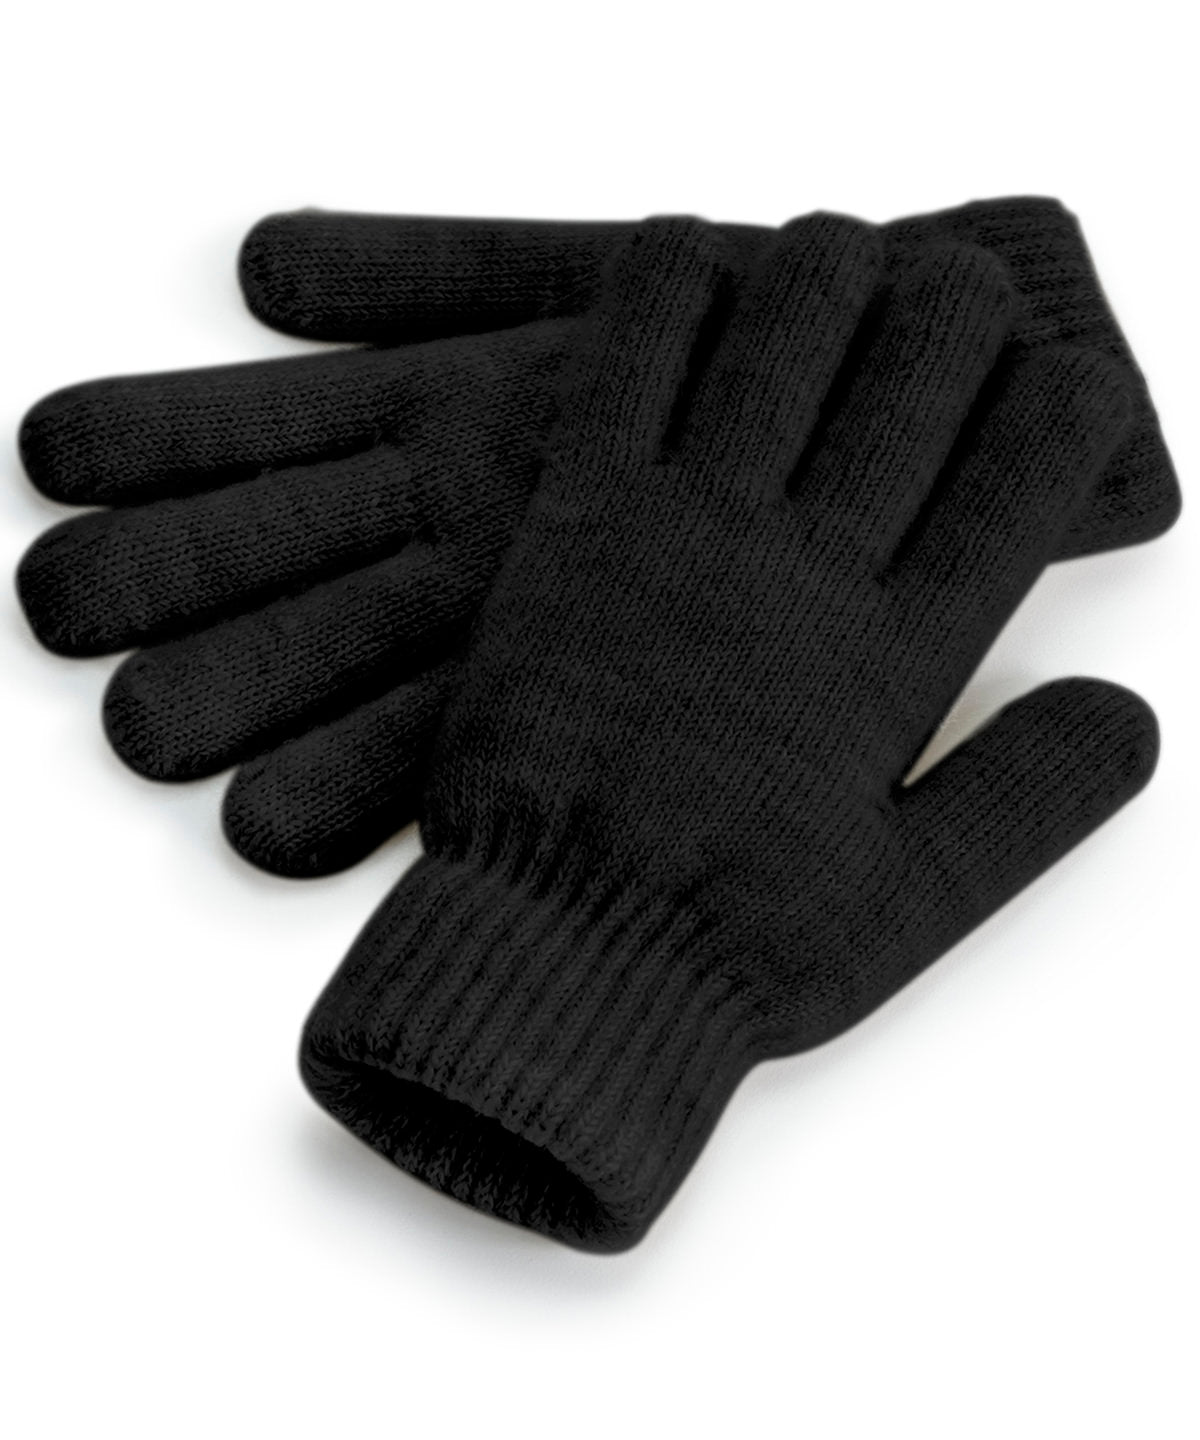 Personalised Gloves - Black Beechfield Cosy ribbed-cuff gloves